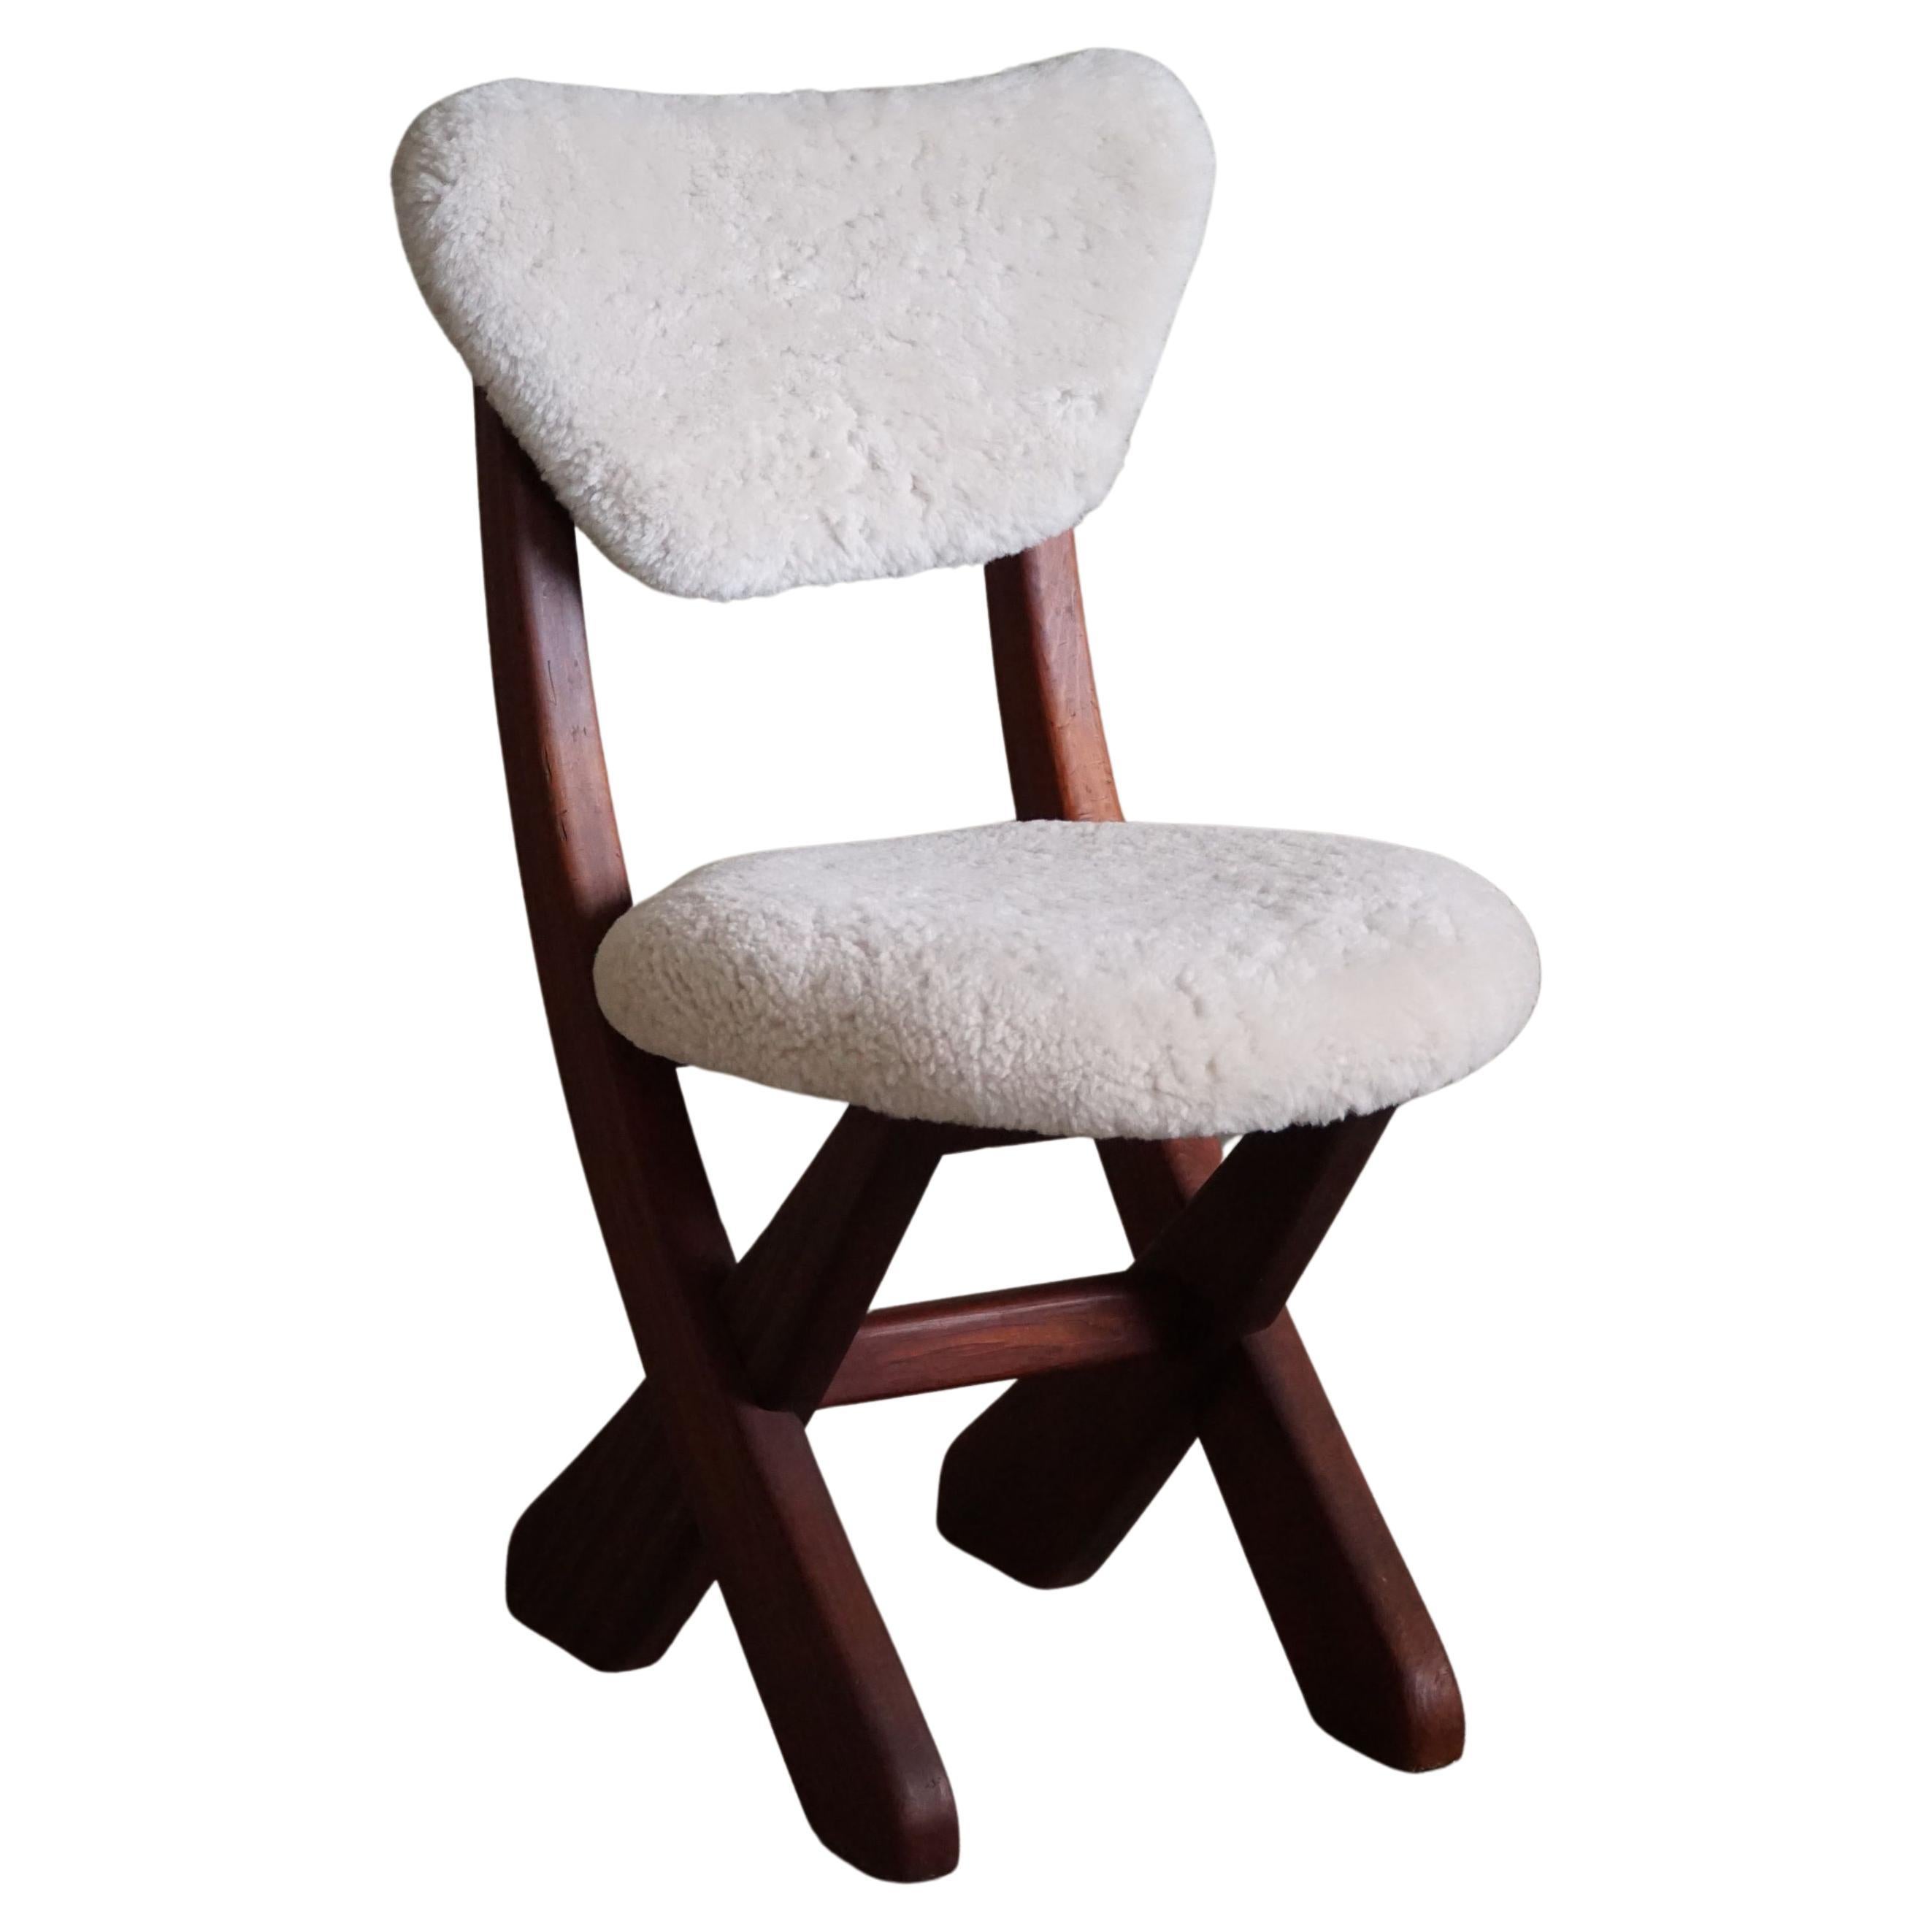 Danish Mid Century Modern, Dining Chair in Pine & Lambswool, 1970s For Sale